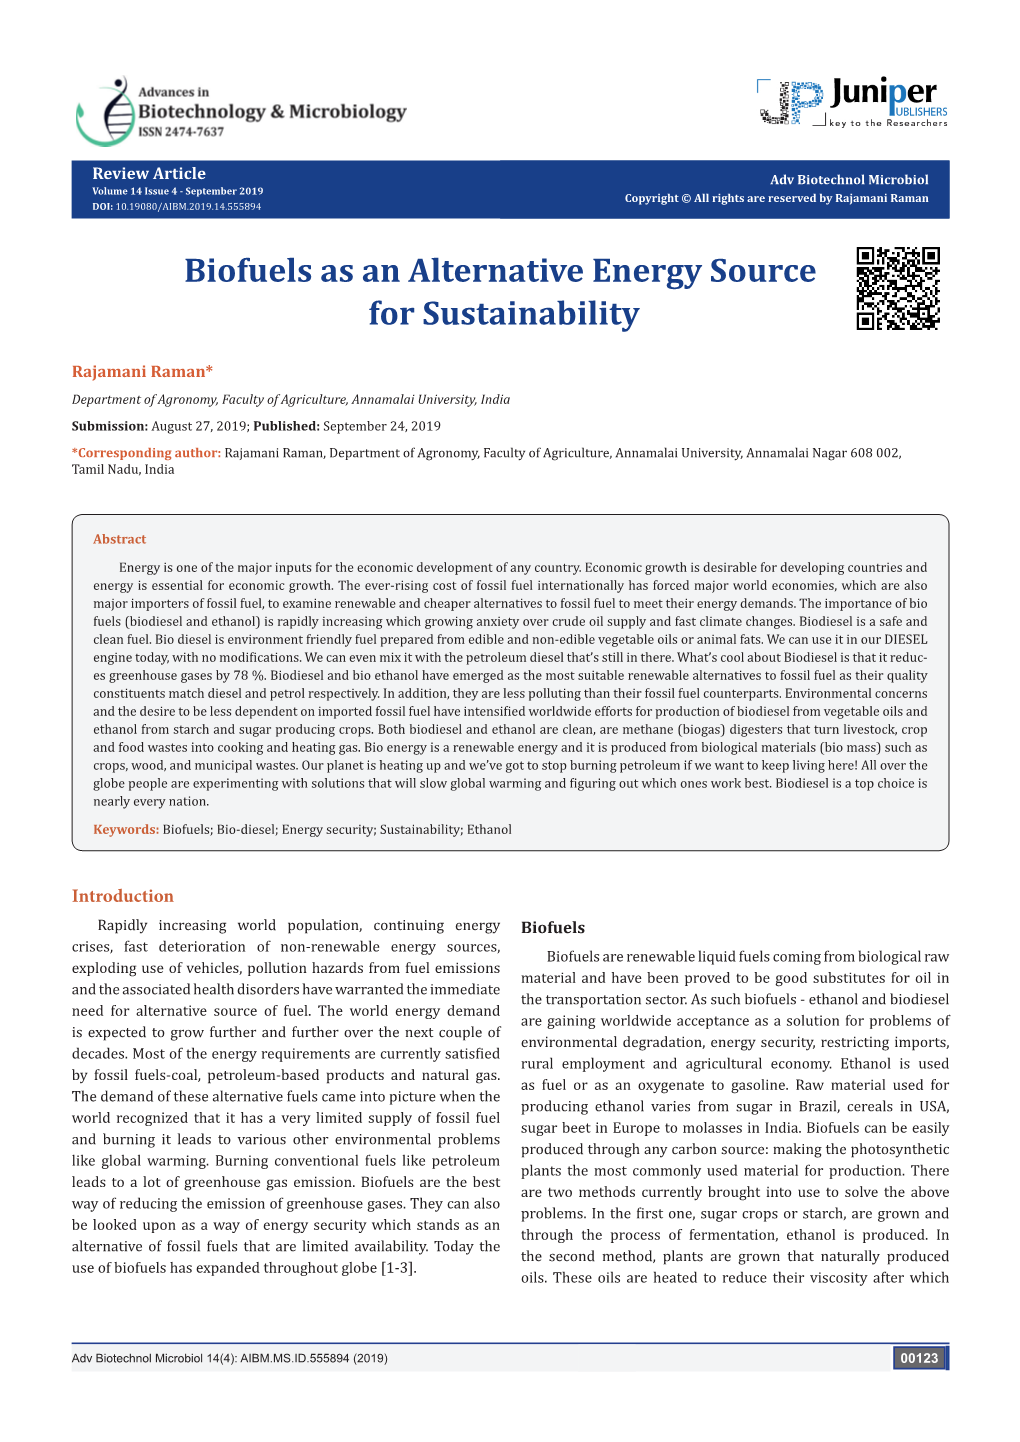 Biofuels As an Alternative Energy Source for Sustainability